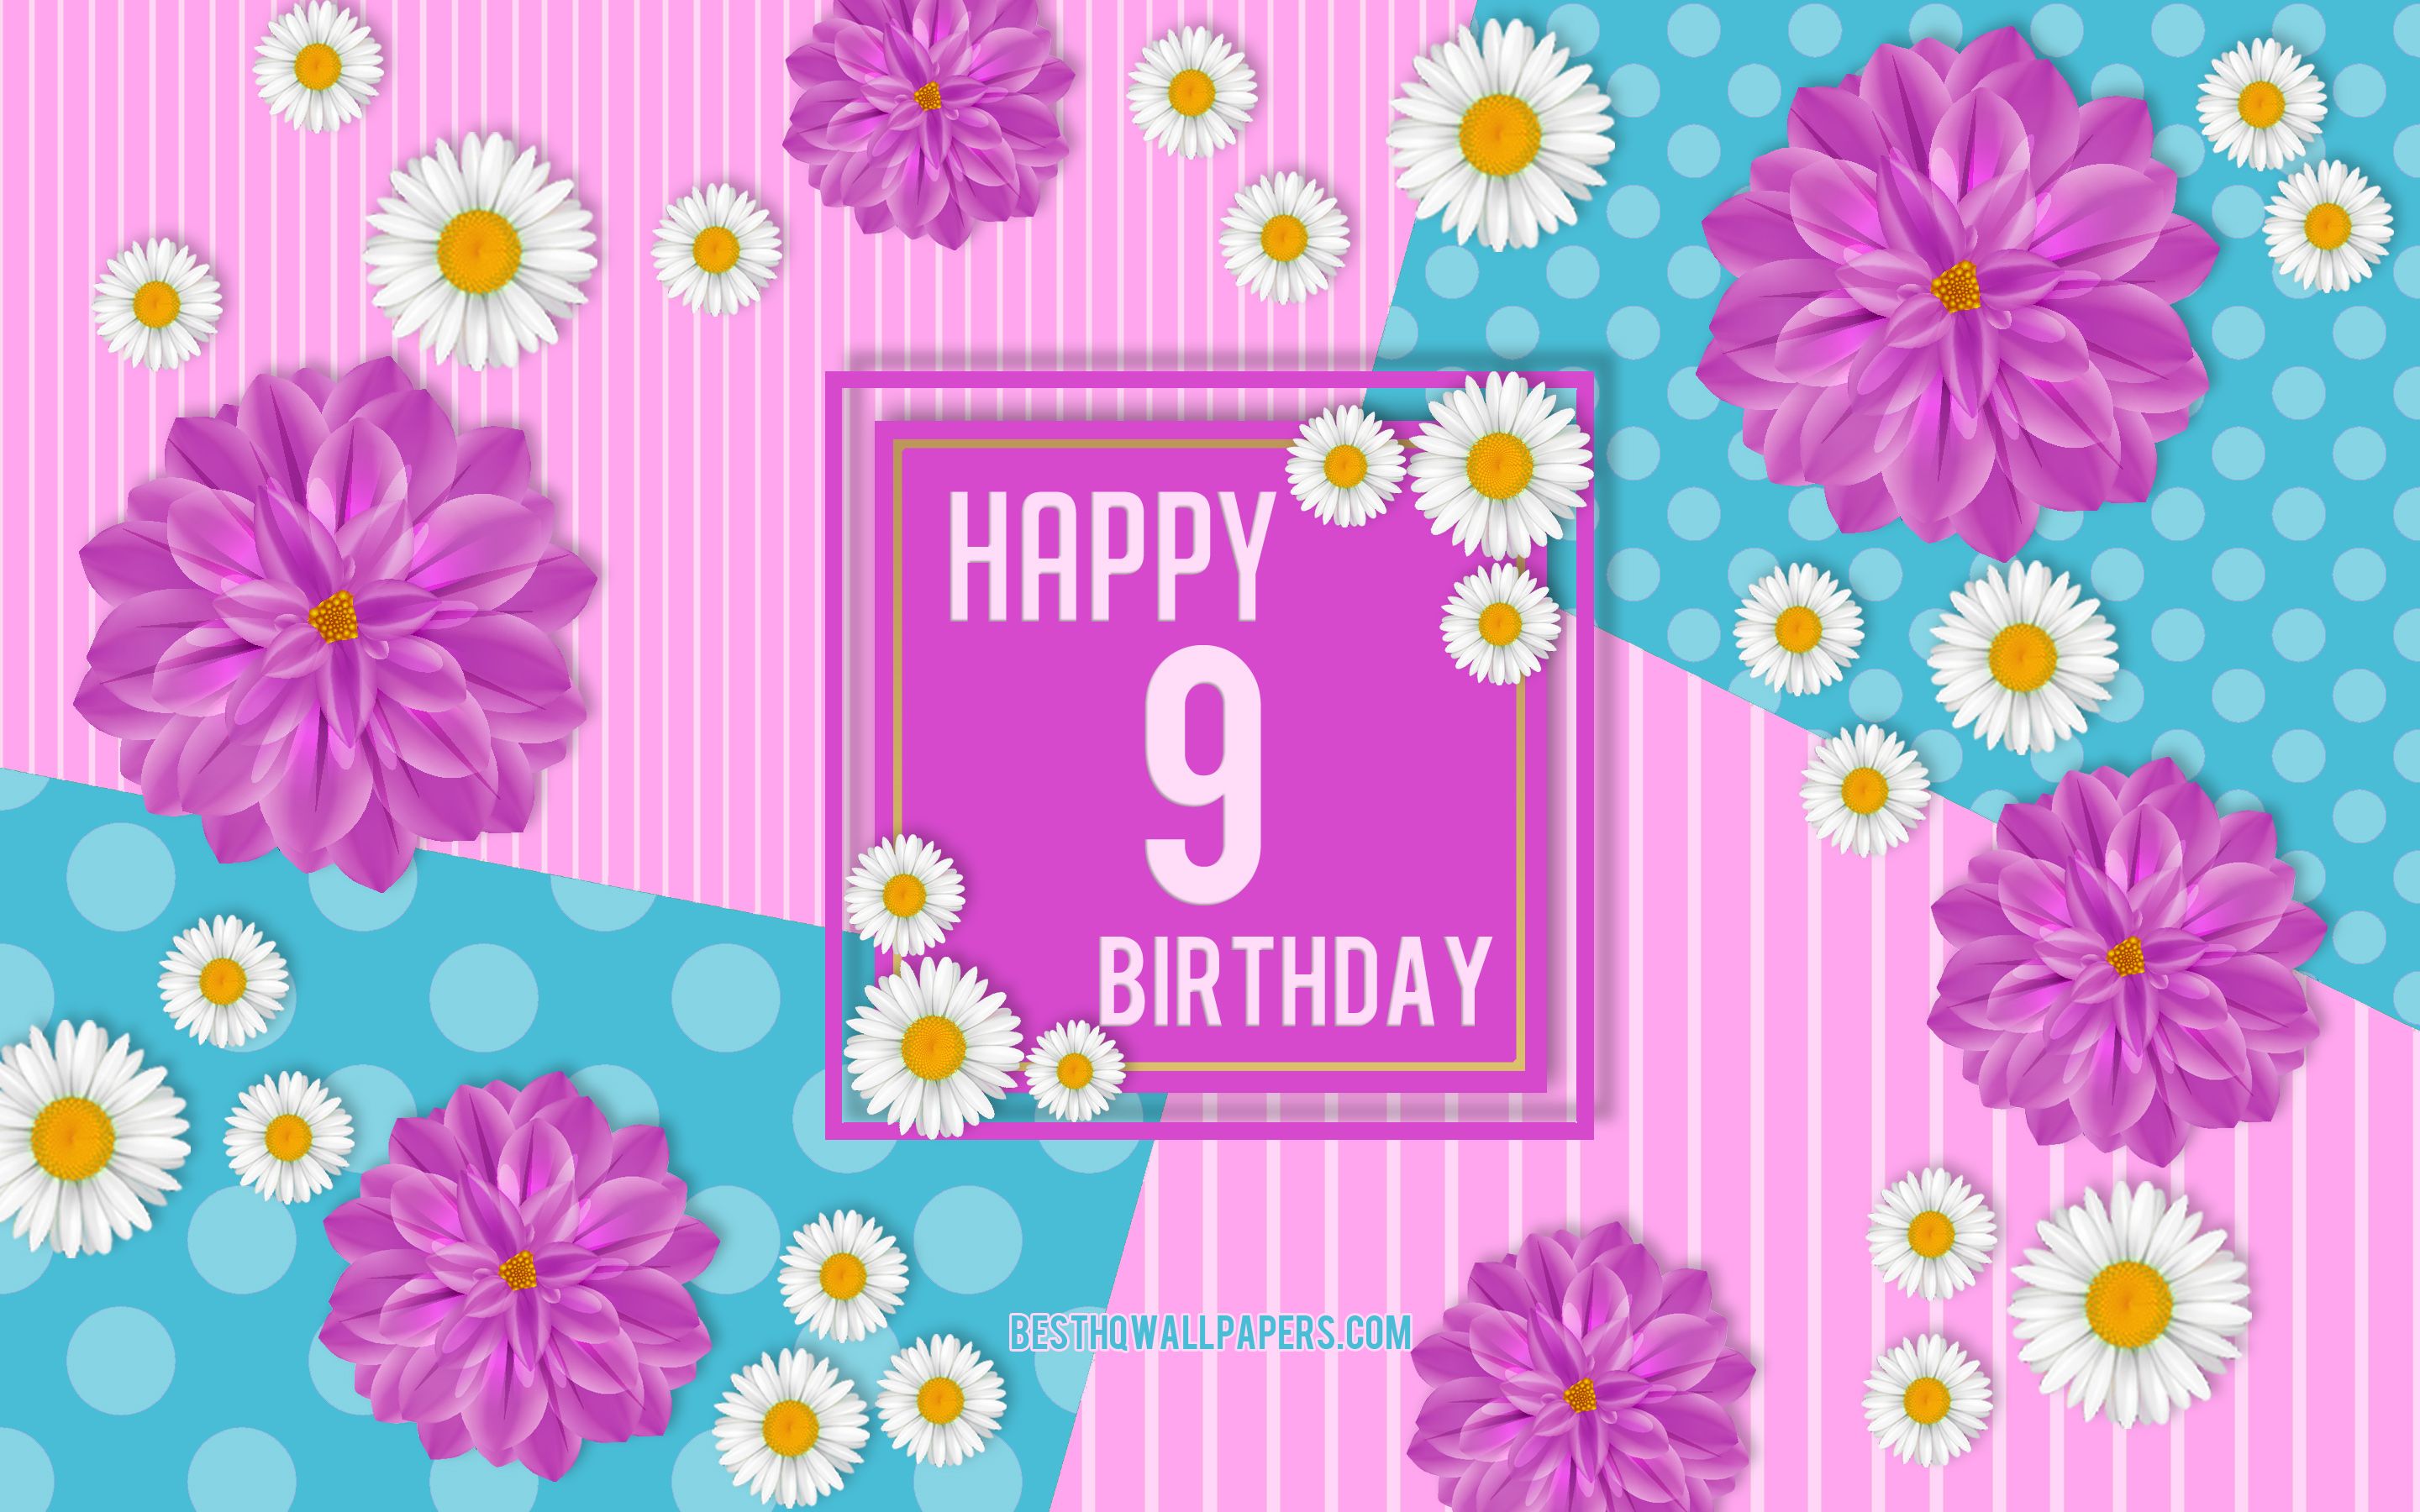 Download wallpaper 9th Happy Birthday, Spring Birthday Background, Happy 9th Birthday, Happy 9 Years Birthday, Birthday flowers background, 9 Years Birthday, 9 Years Birthday party for desktop with resolution 2880x1800. High Quality